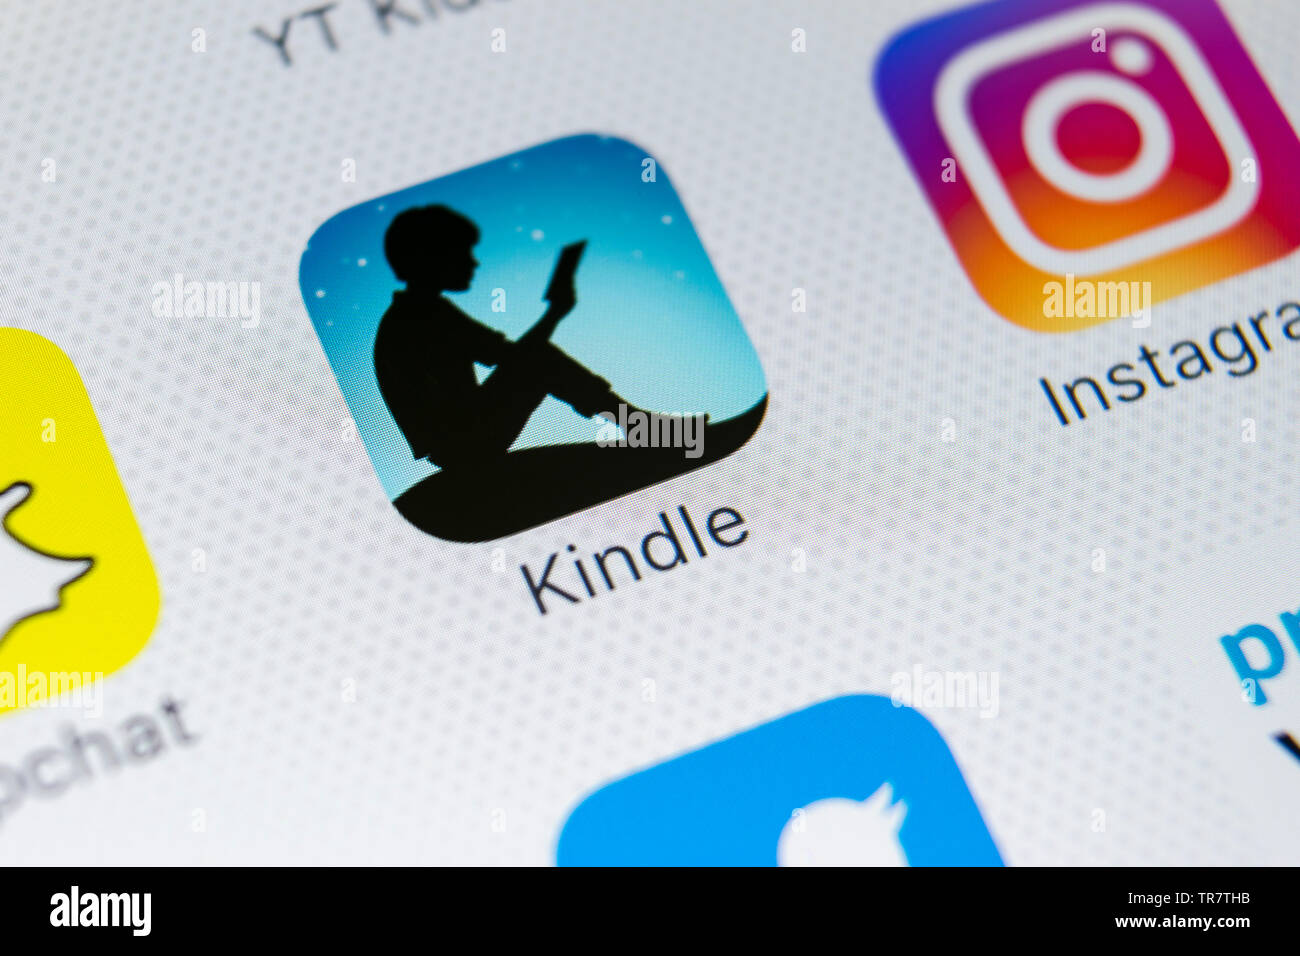 Sankt-Petersburg, Russia, March 1, 2018: Amazon Kindle application icon on Apple iPhone X screen close-up. Amazon Kindle app icon. Amazon kindle appli Stock Photo